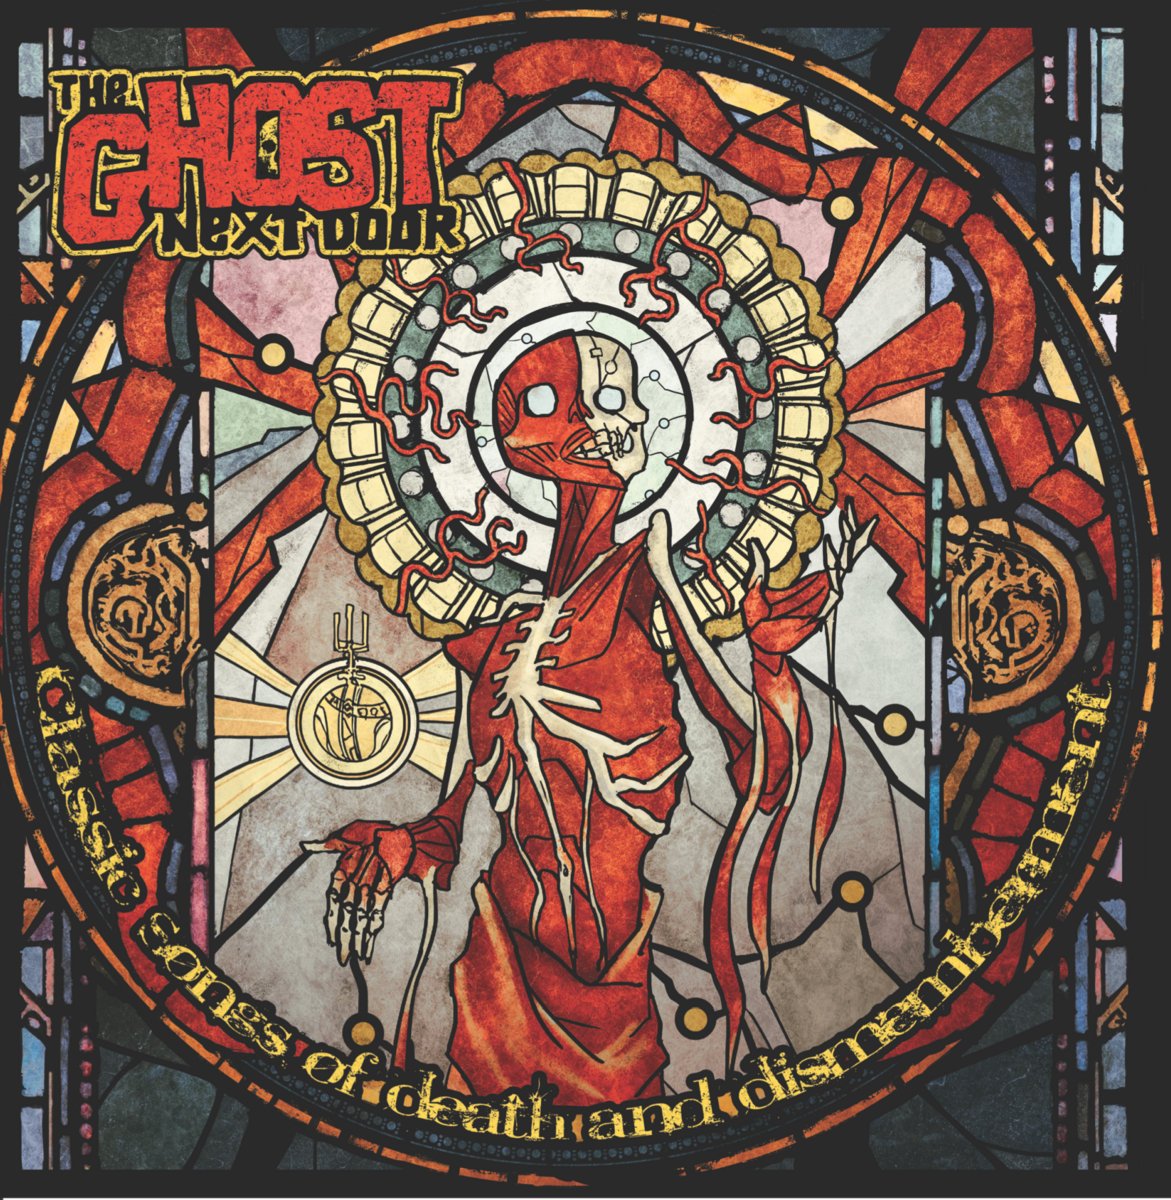 Image of The Ghost Next Door - Classic Songs Of Death and Dismemberment 4-Panel Digipack CD